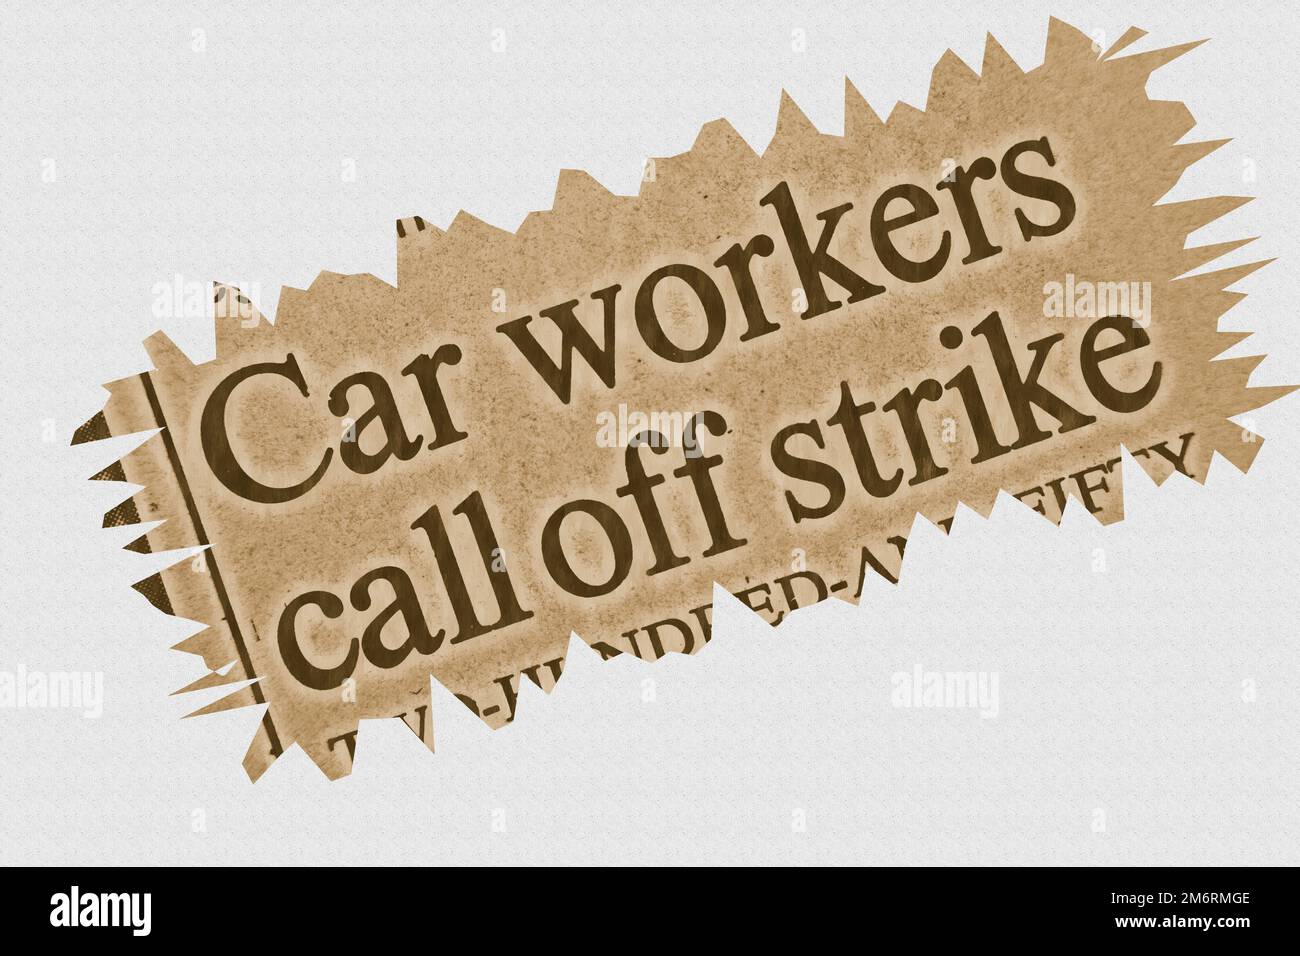 Car workers call off strike - news story from 1975 newspaper headline article title with highlighted overlay Stock Photo